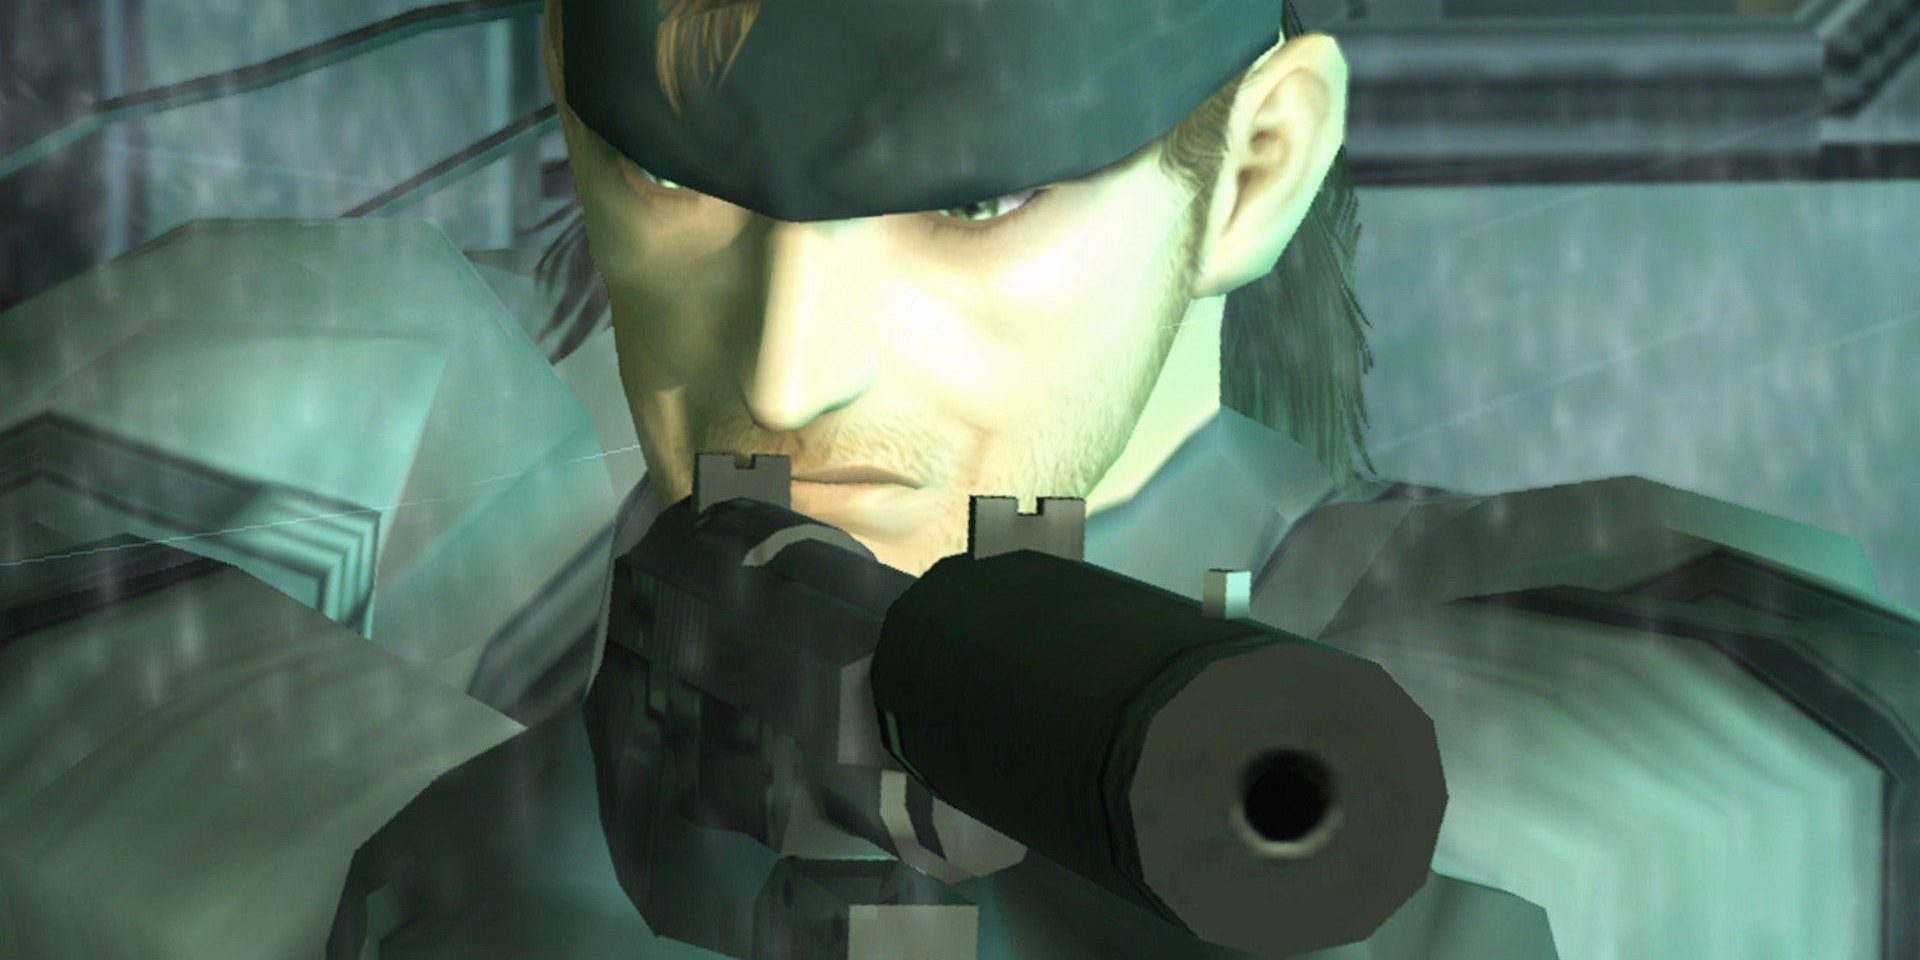 The Metal Gear series has now sold over 60 million copies